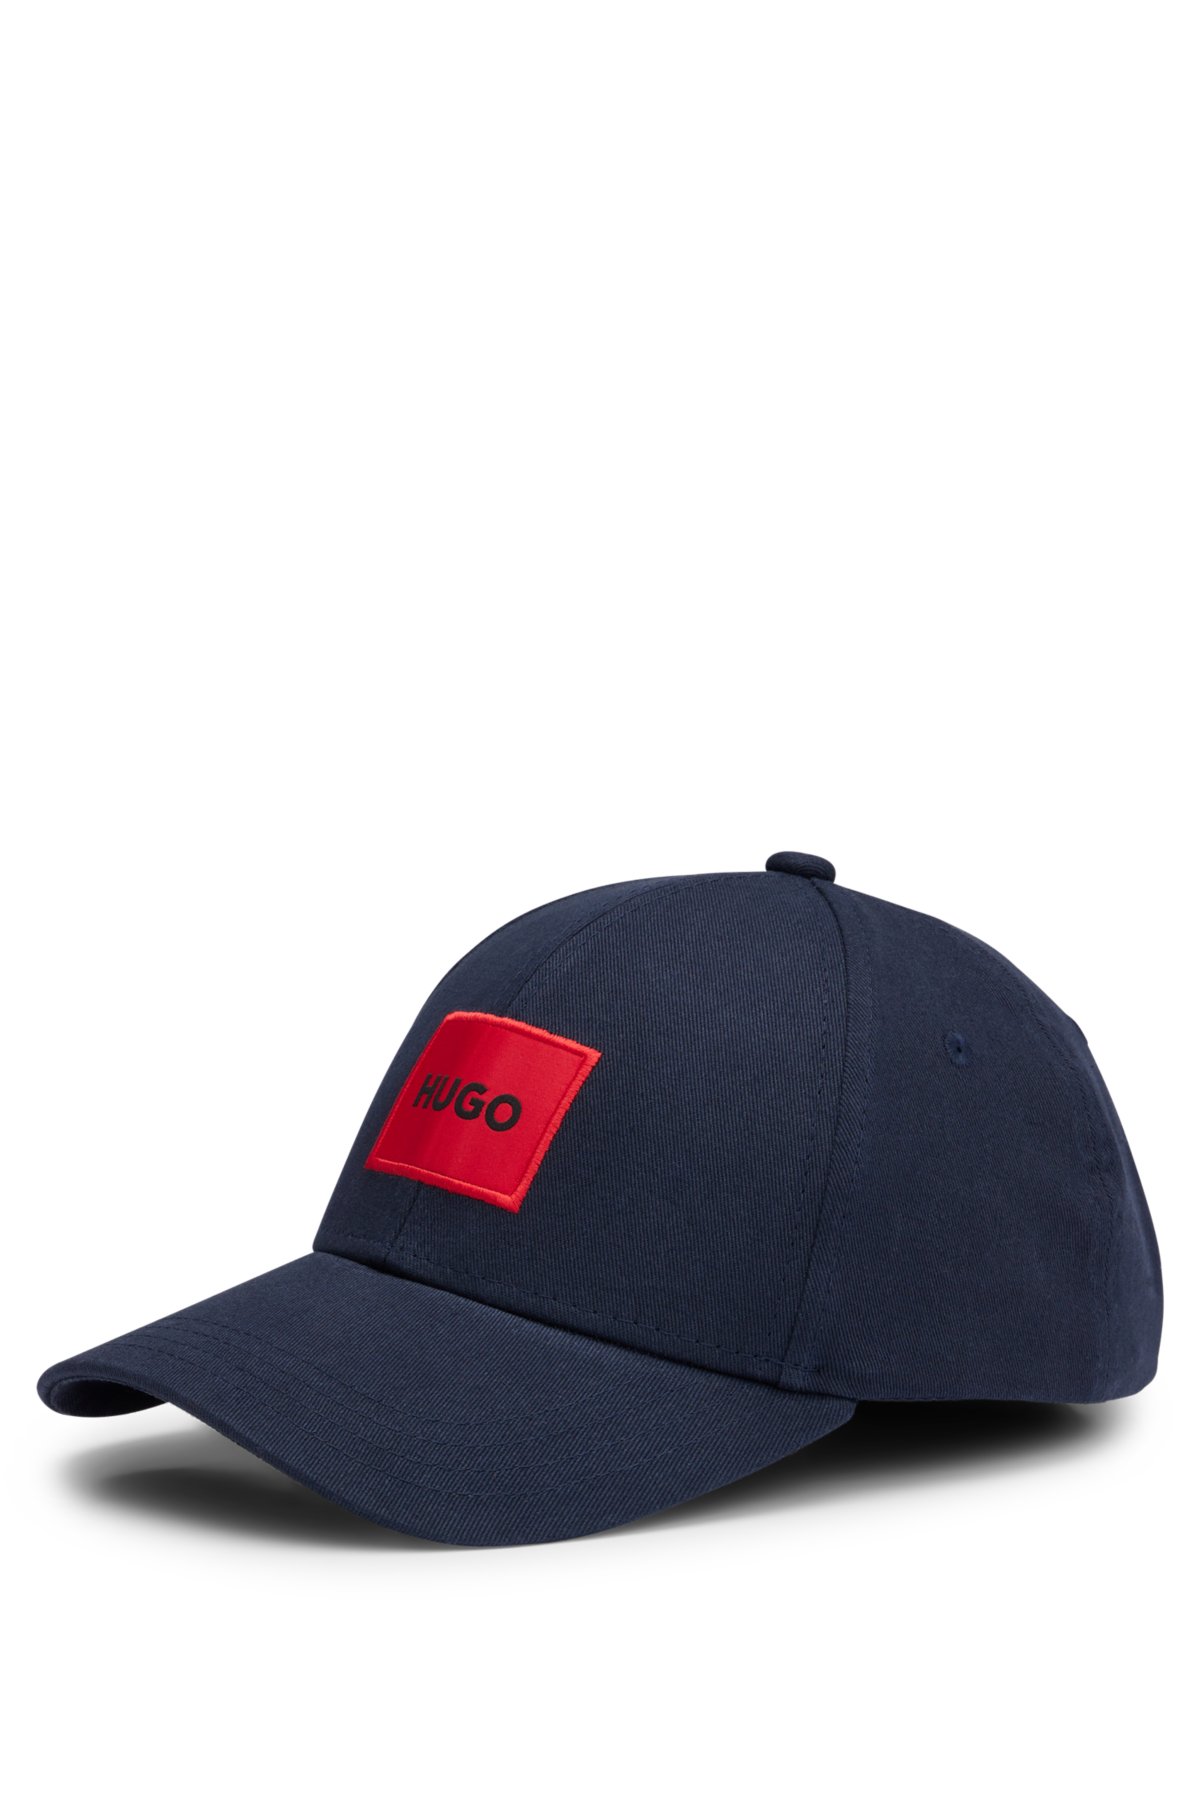 with Cotton-twill HUGO - red label logo cap